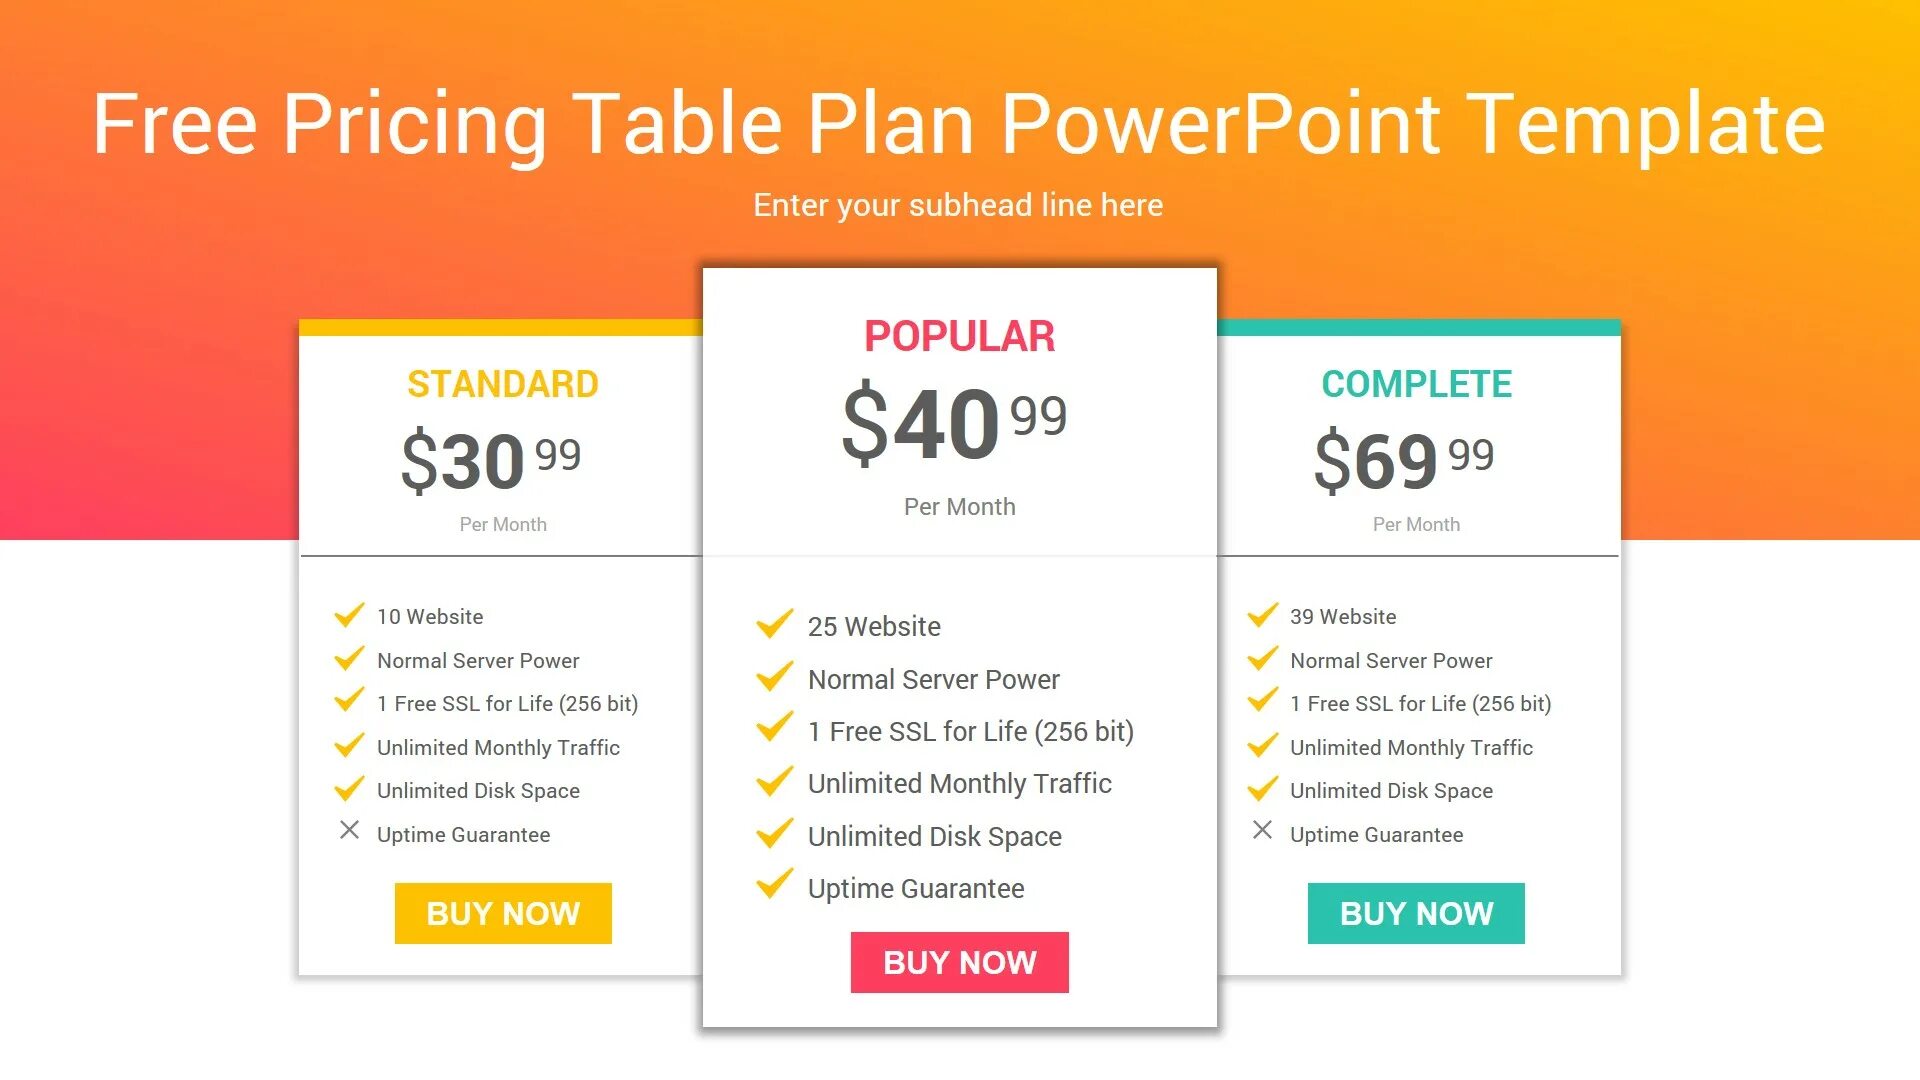 Pricing Table. Pricing Template. Pricing Plan.